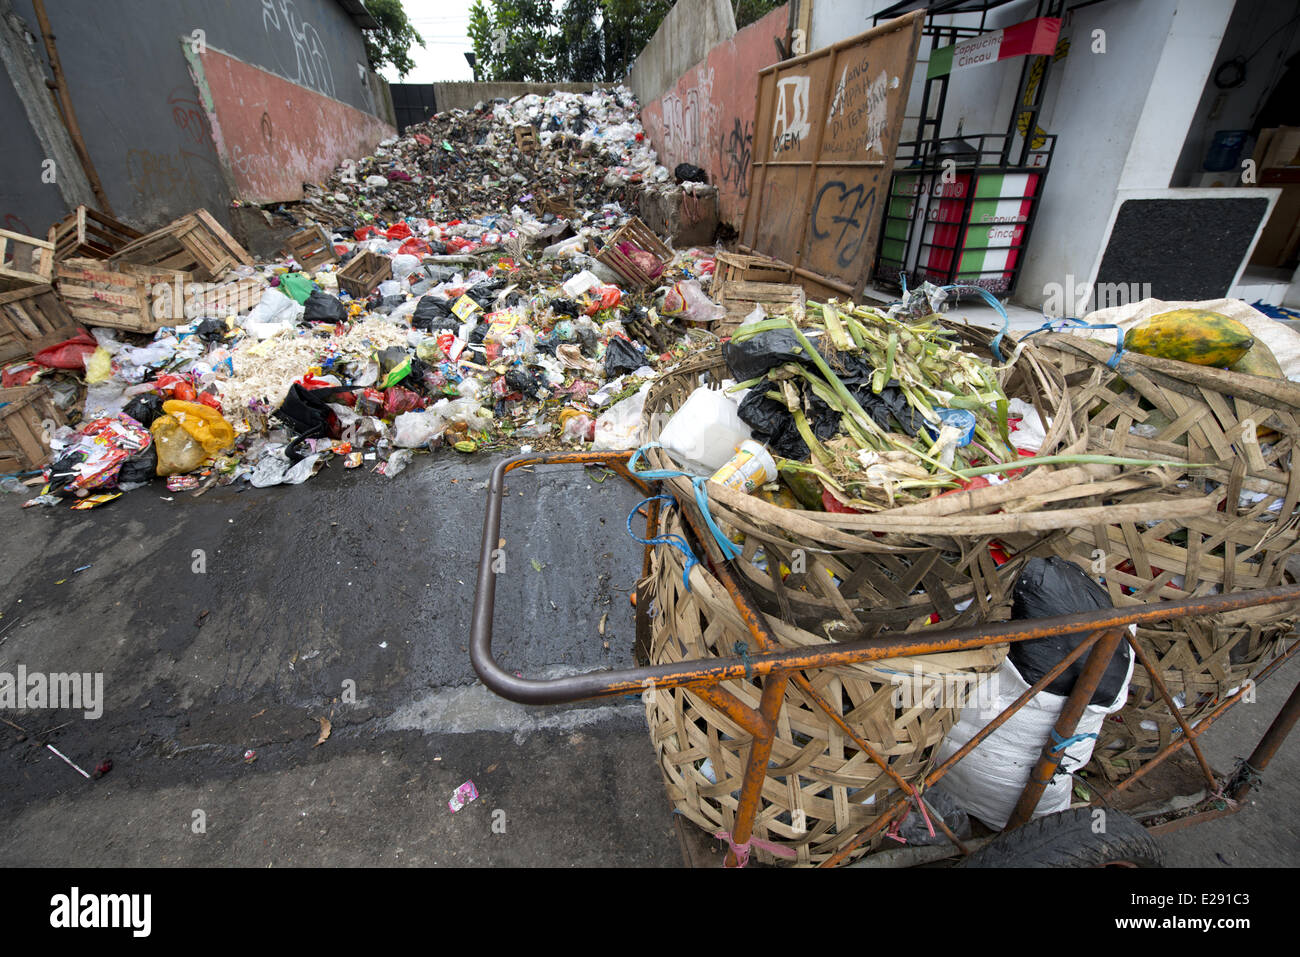 Large pile of rubbish and collection baskets in city, Manggarai District, Jakarta, Java, Indonesia, December Stock Photo